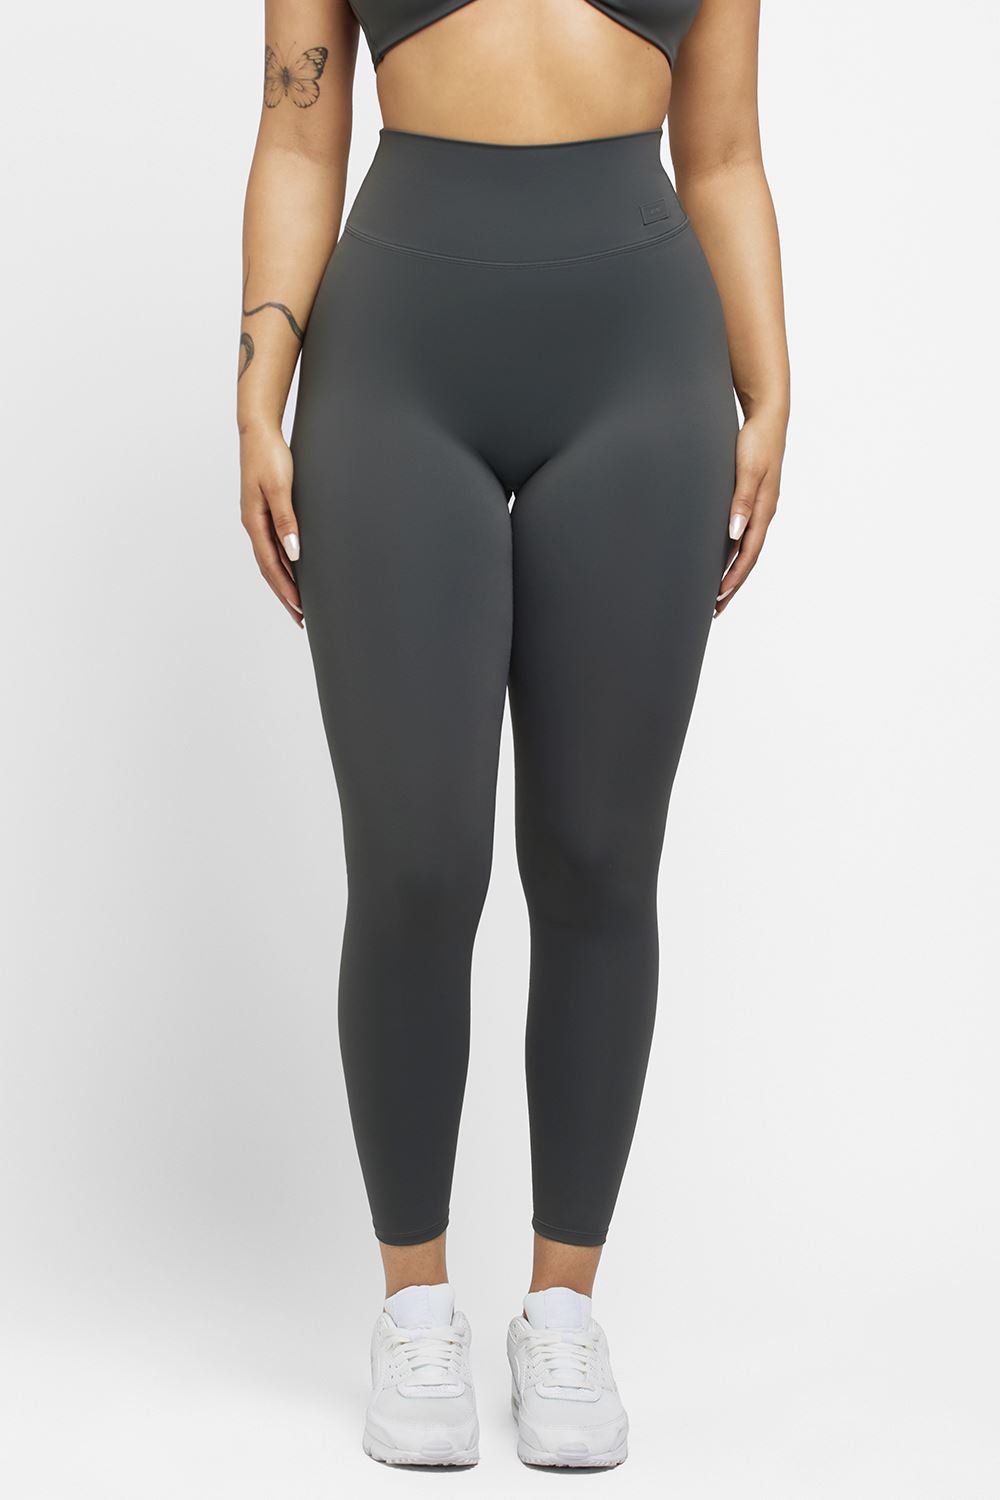 Buy High-rise Tummy Control Yoga Pants Online in India 